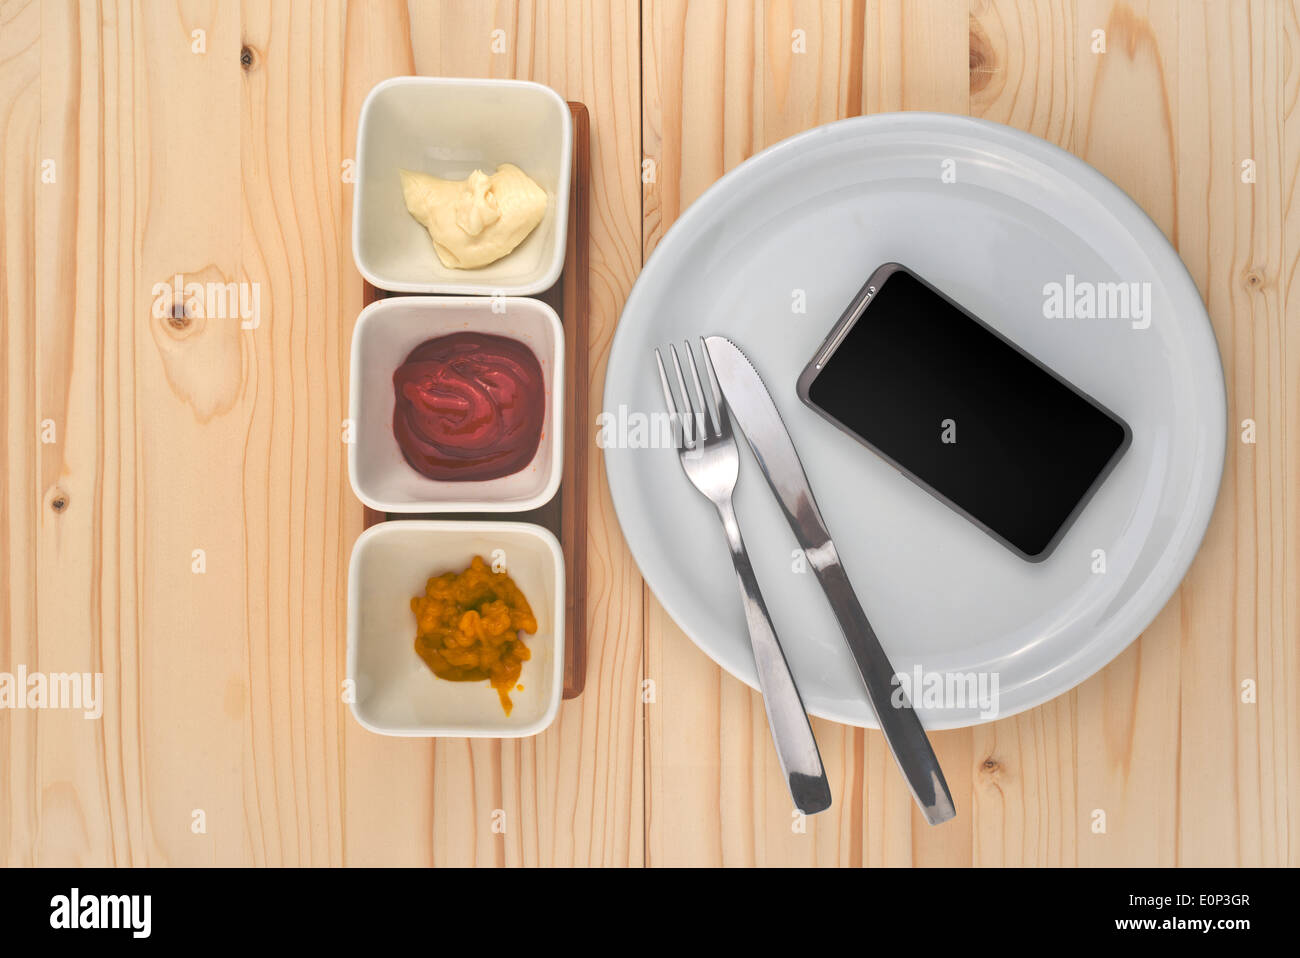 Mobile smart phone served as dinner on white plate. Concept of information absorption process. Stock Photo